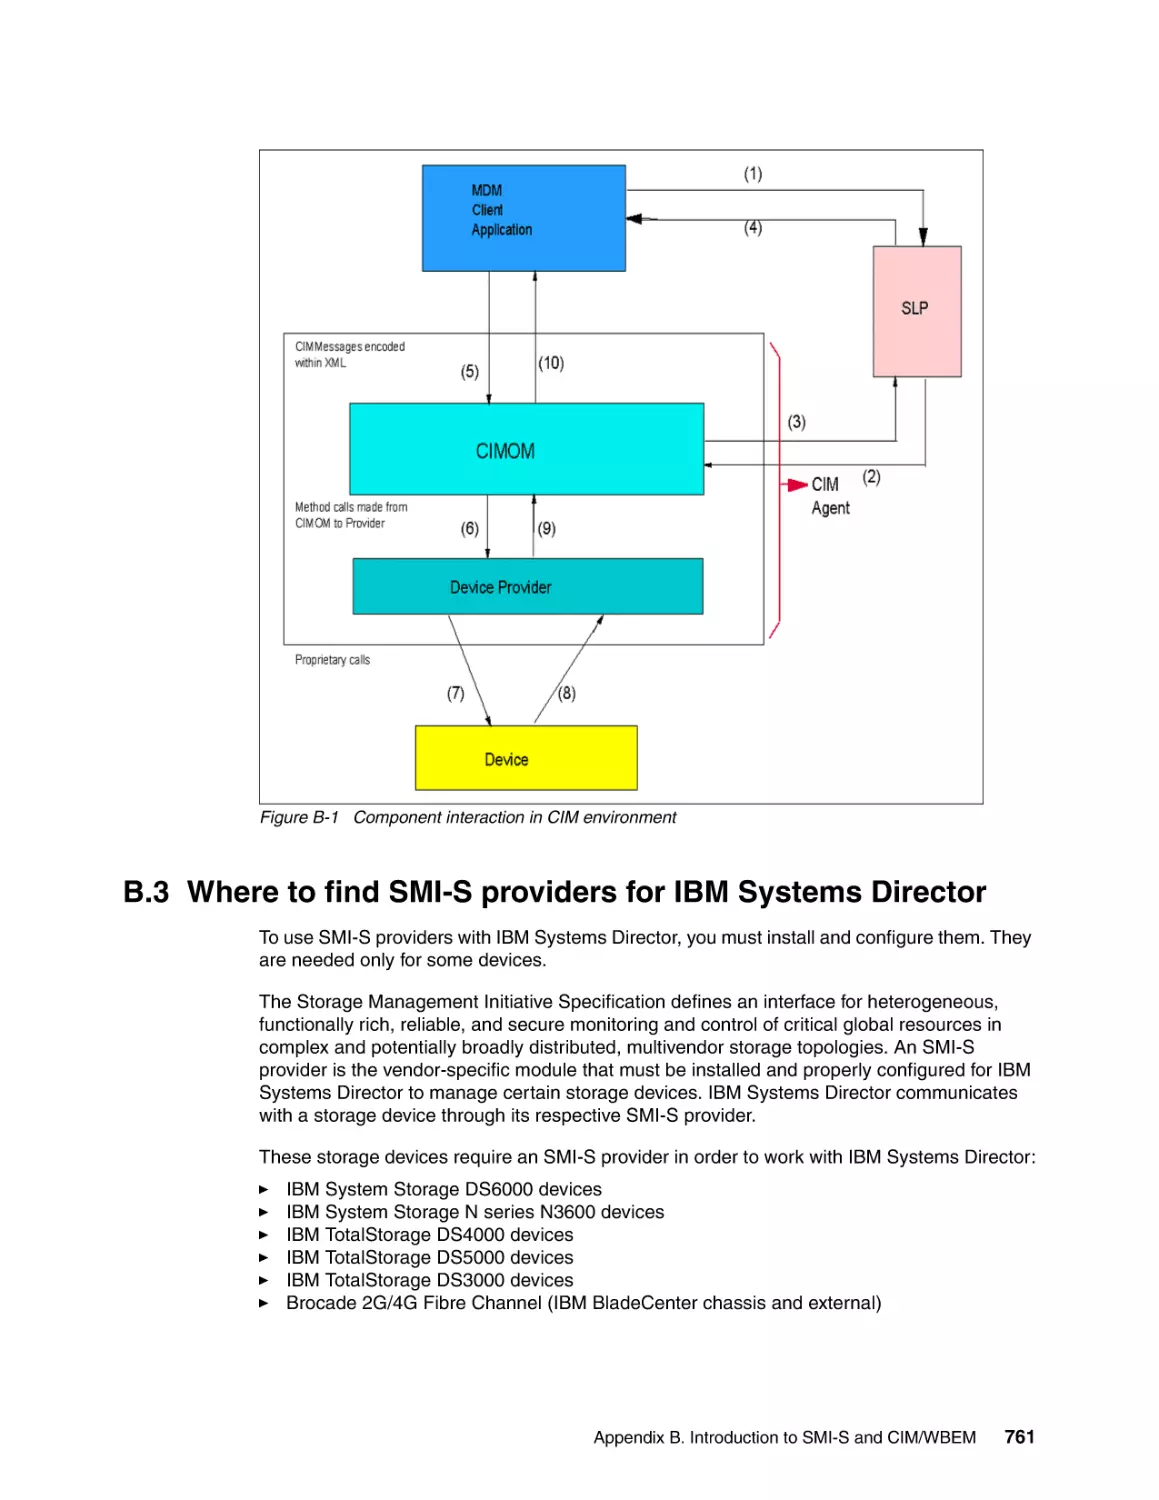 B.3 Where to find SMI-S providers for IBM Systems Director